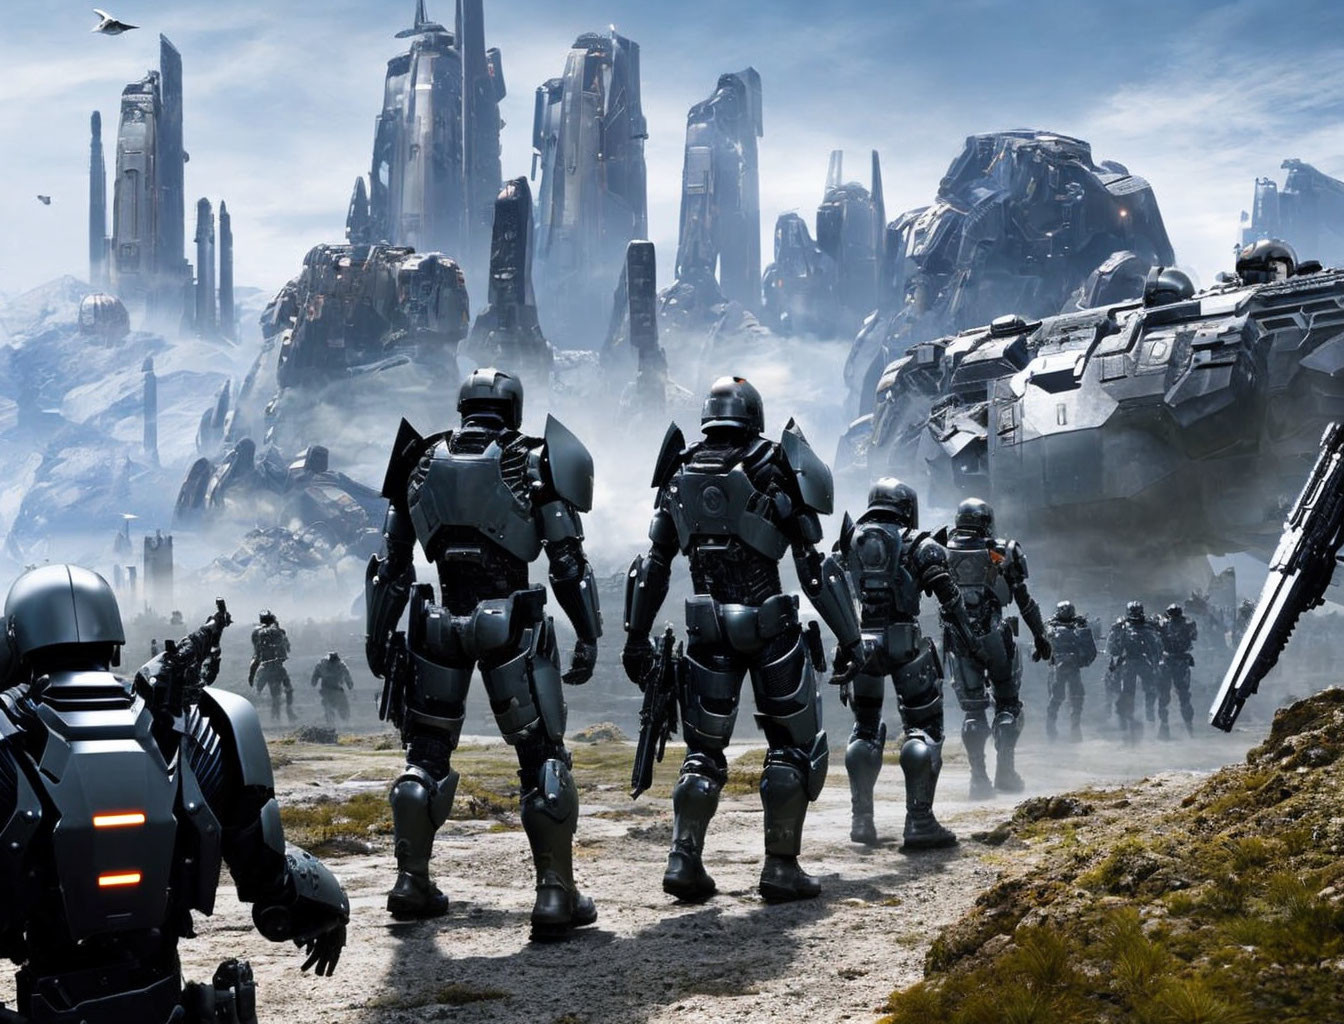 Futuristic soldiers in armor on desolate battleground with robots